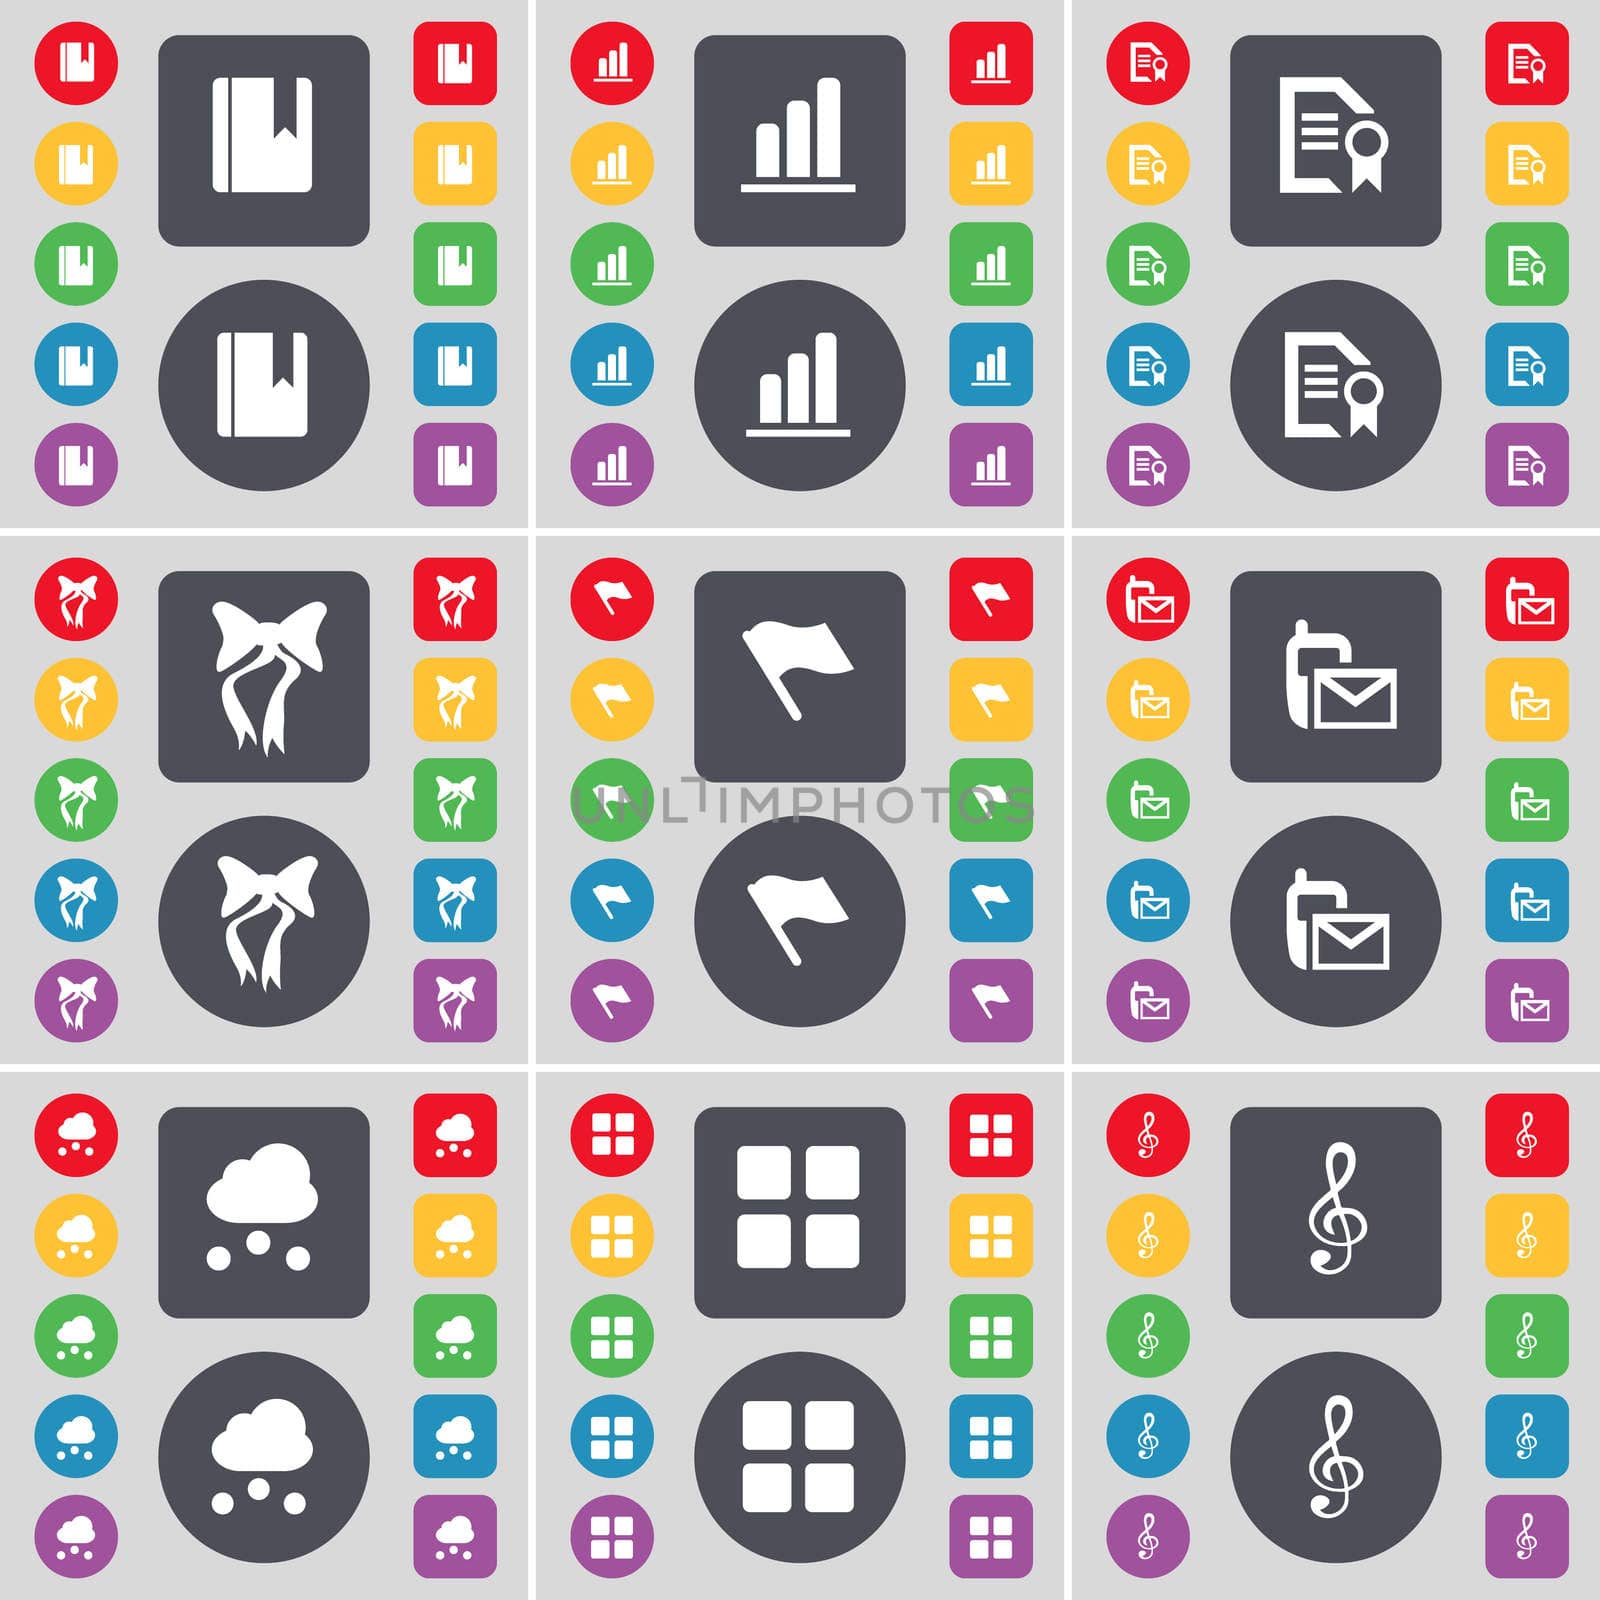 Dictionary, Diagram, Text file, Bow, Flag, SMS, Cloud, Apps, Cle icon symbol. A large set of flat, colored buttons for your design.  by serhii_lohvyniuk